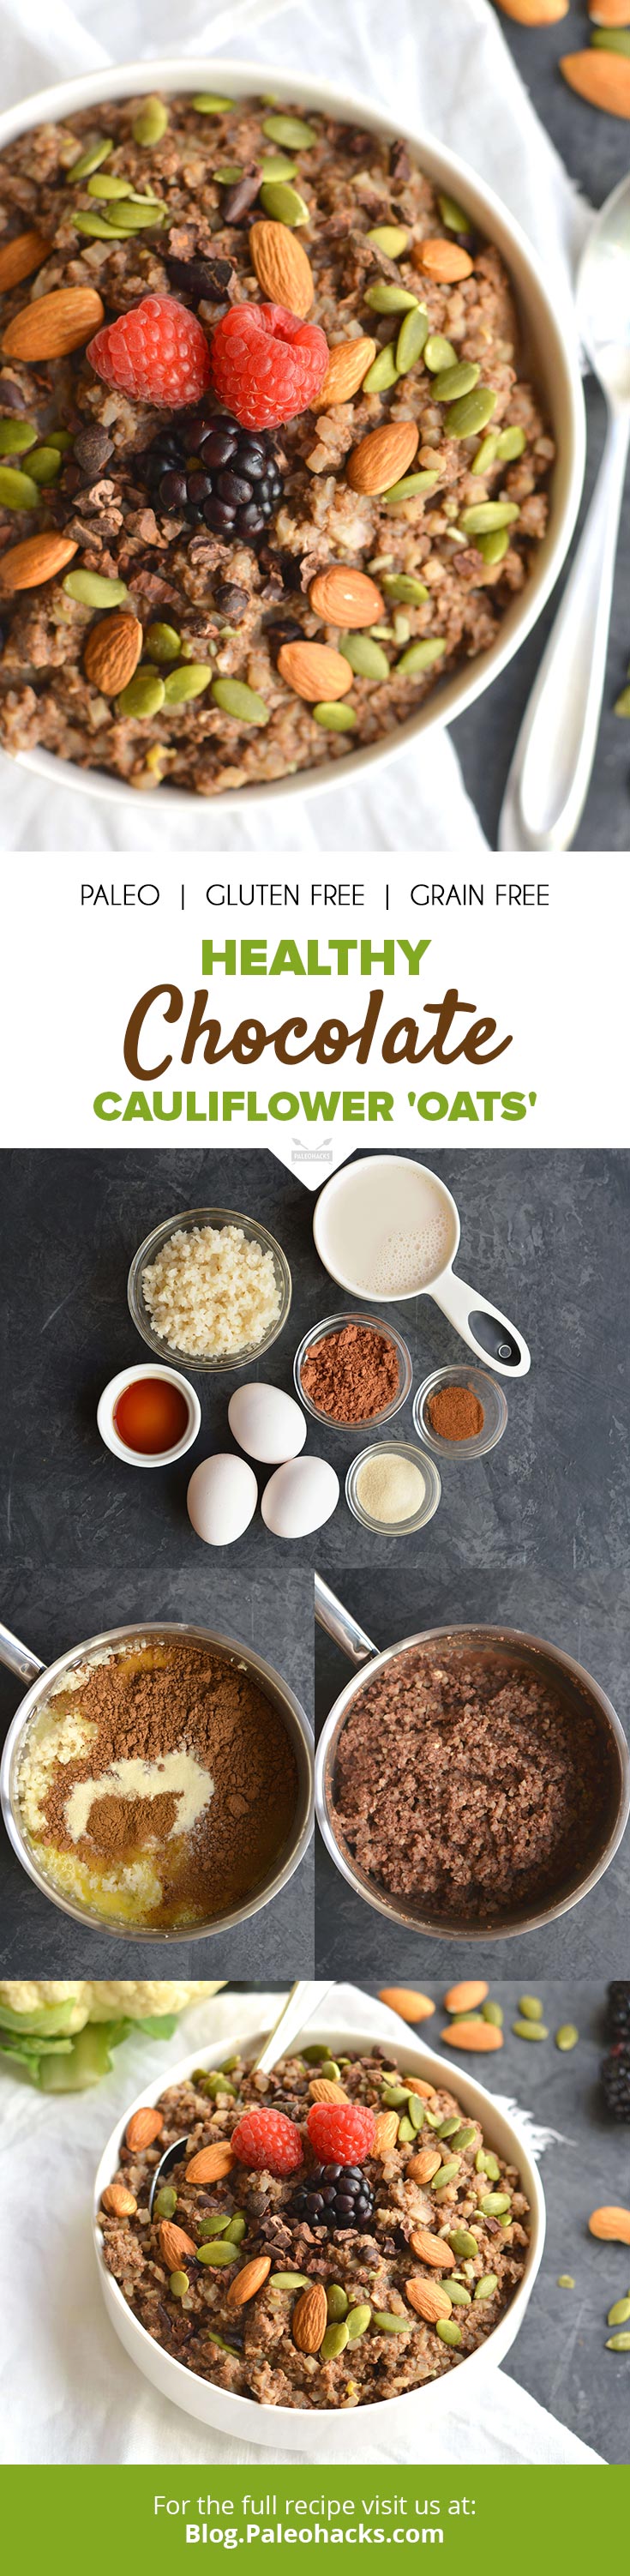 Start your day with a warm bowl of Paleo chocolate cauliflower 'oats' that taste like chocolate pudding.